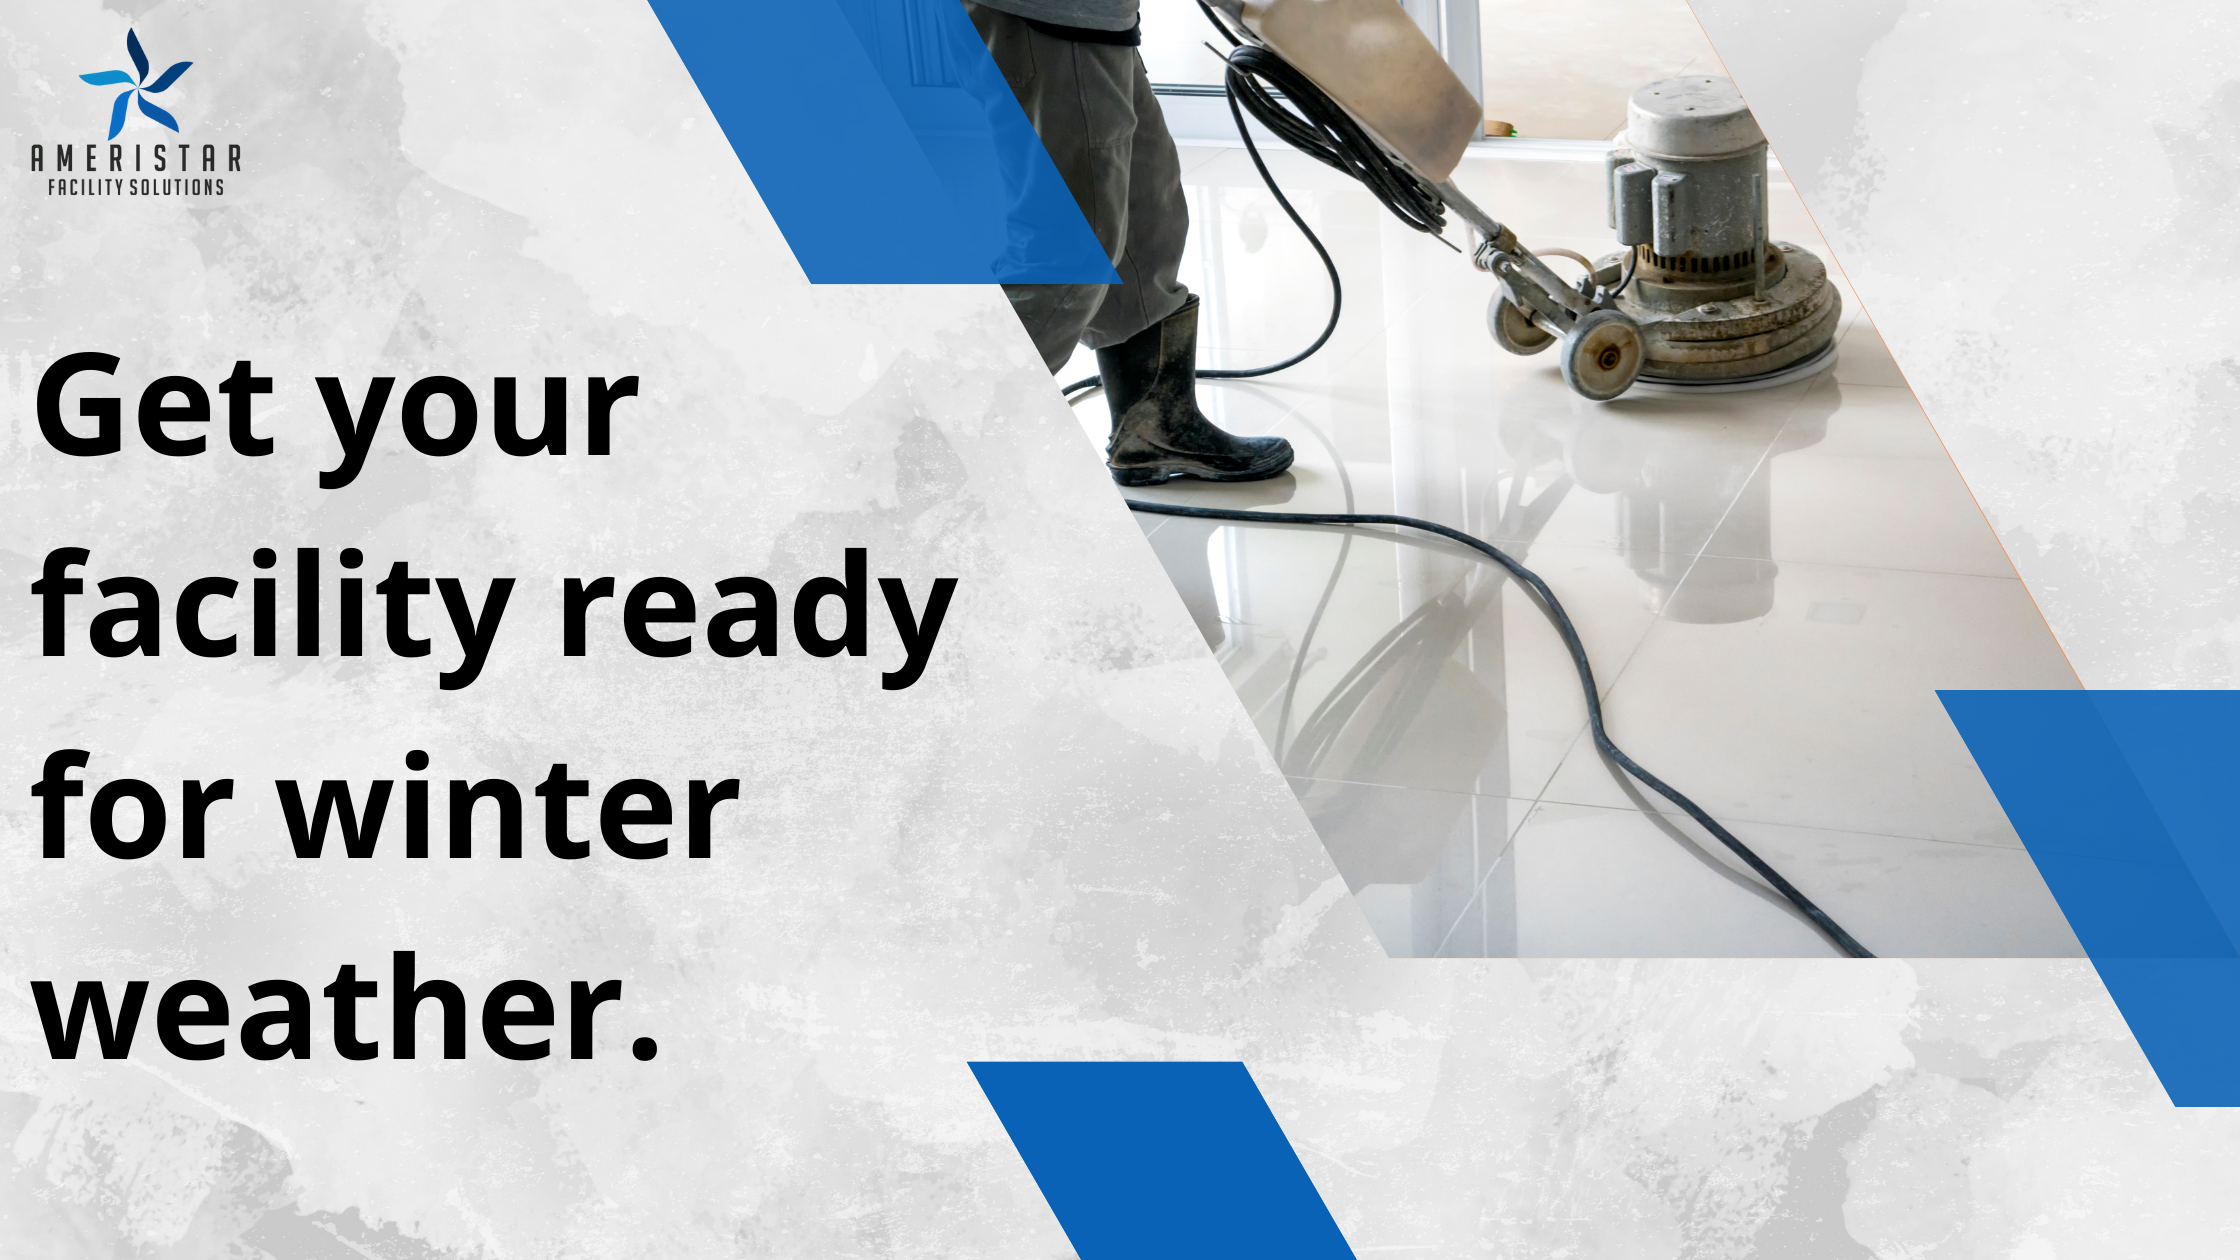 Get Your Facility Ready for Winter Weather with these Simple Steps